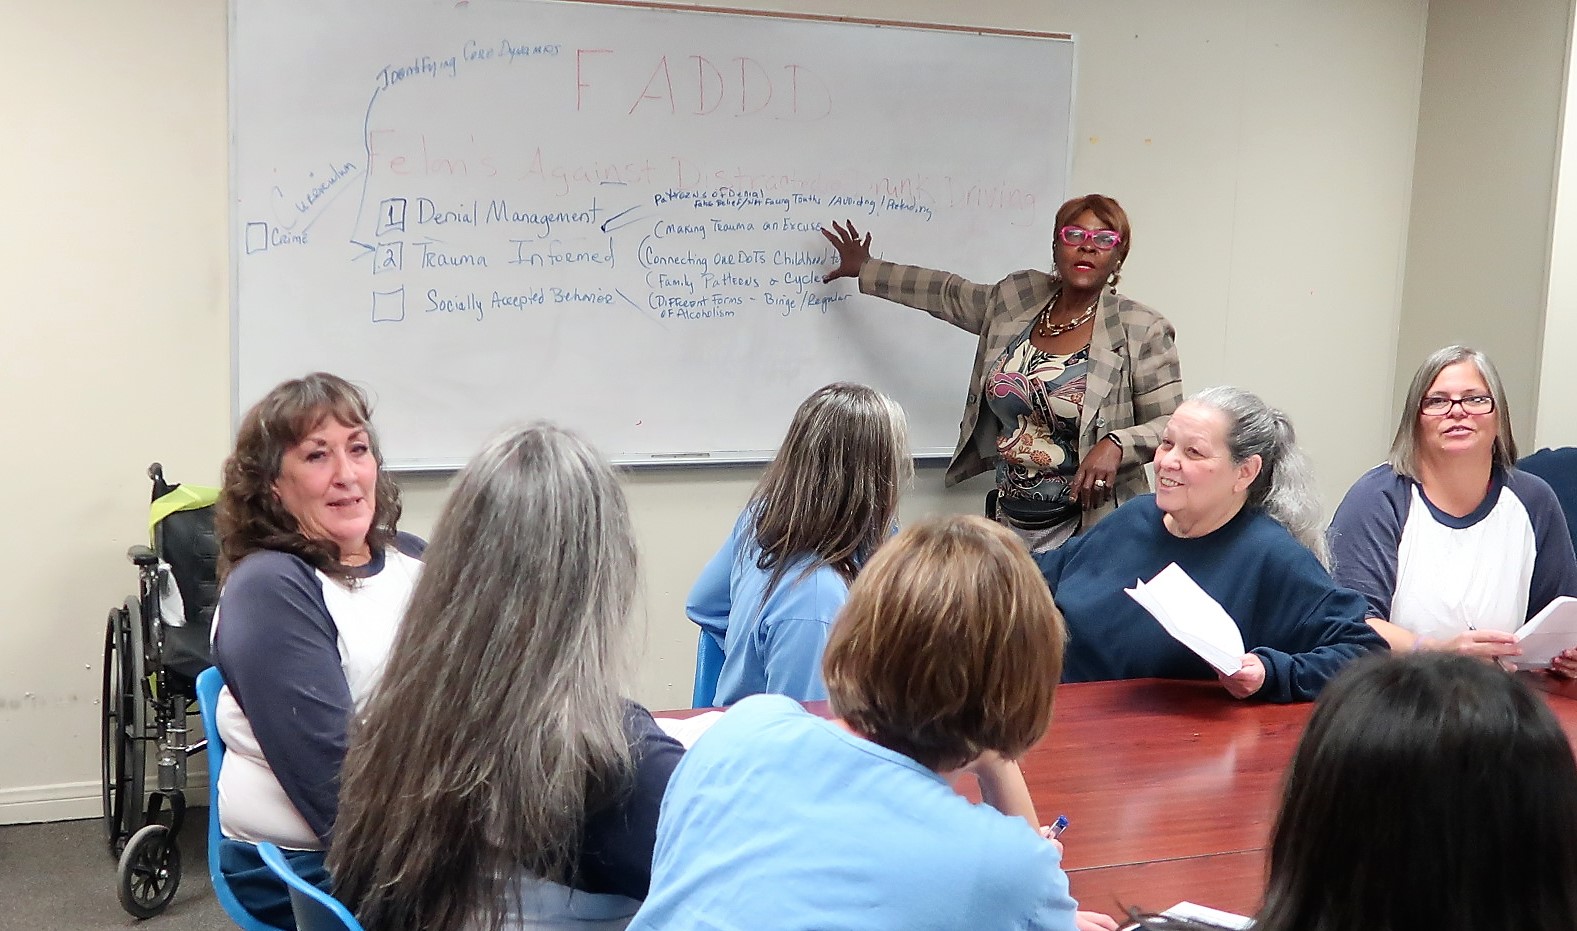 One woman points to a dry-erase board while others sit around a table.